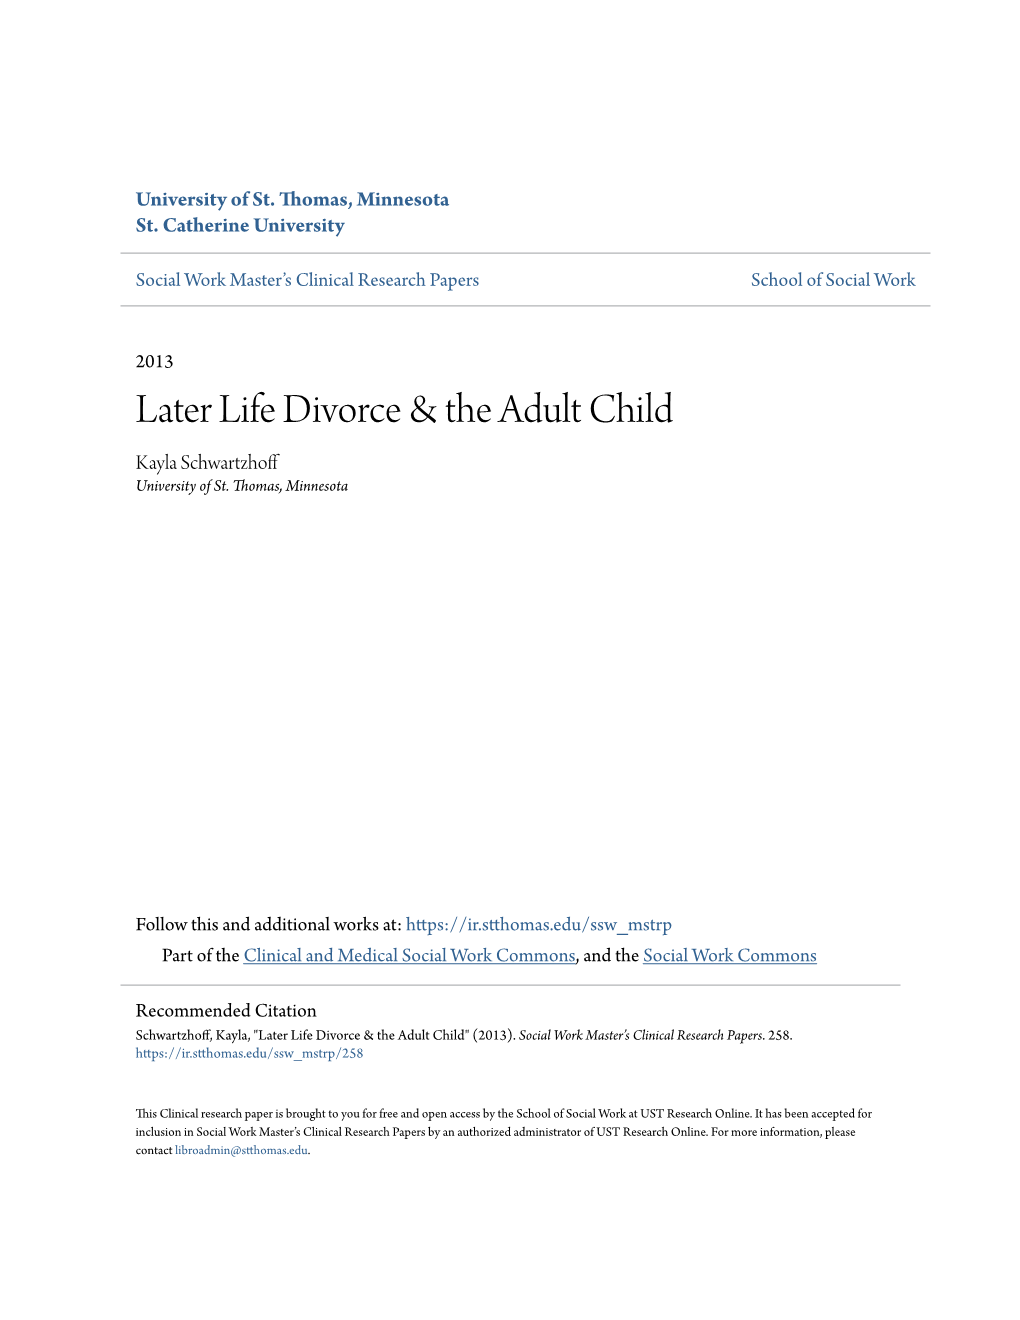 Later Life Divorce & the Adult Child